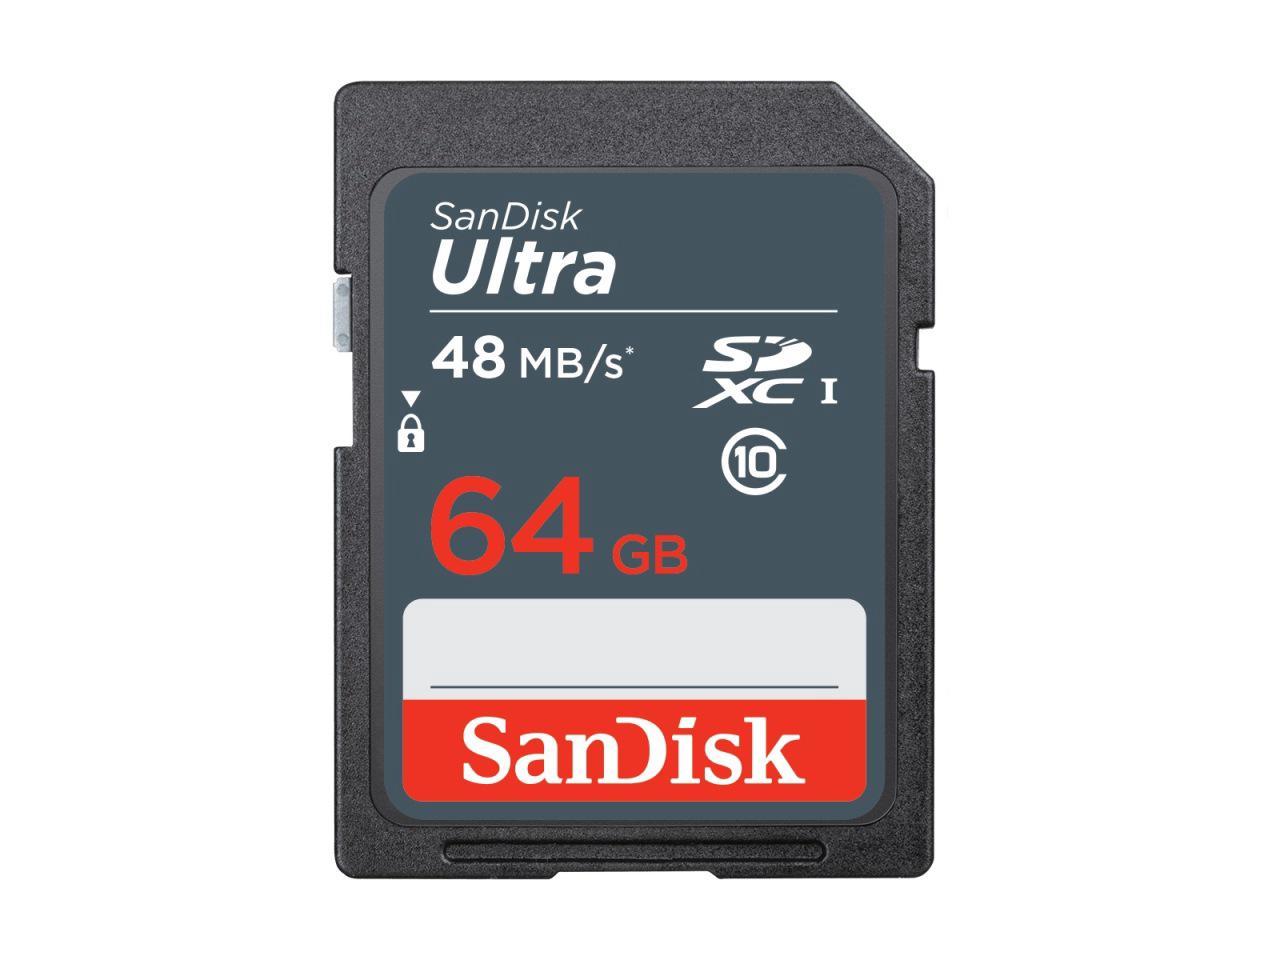 SanDisk Ultra 16GB SDHC UHS-I Class 10 48MB/s Memory Card 